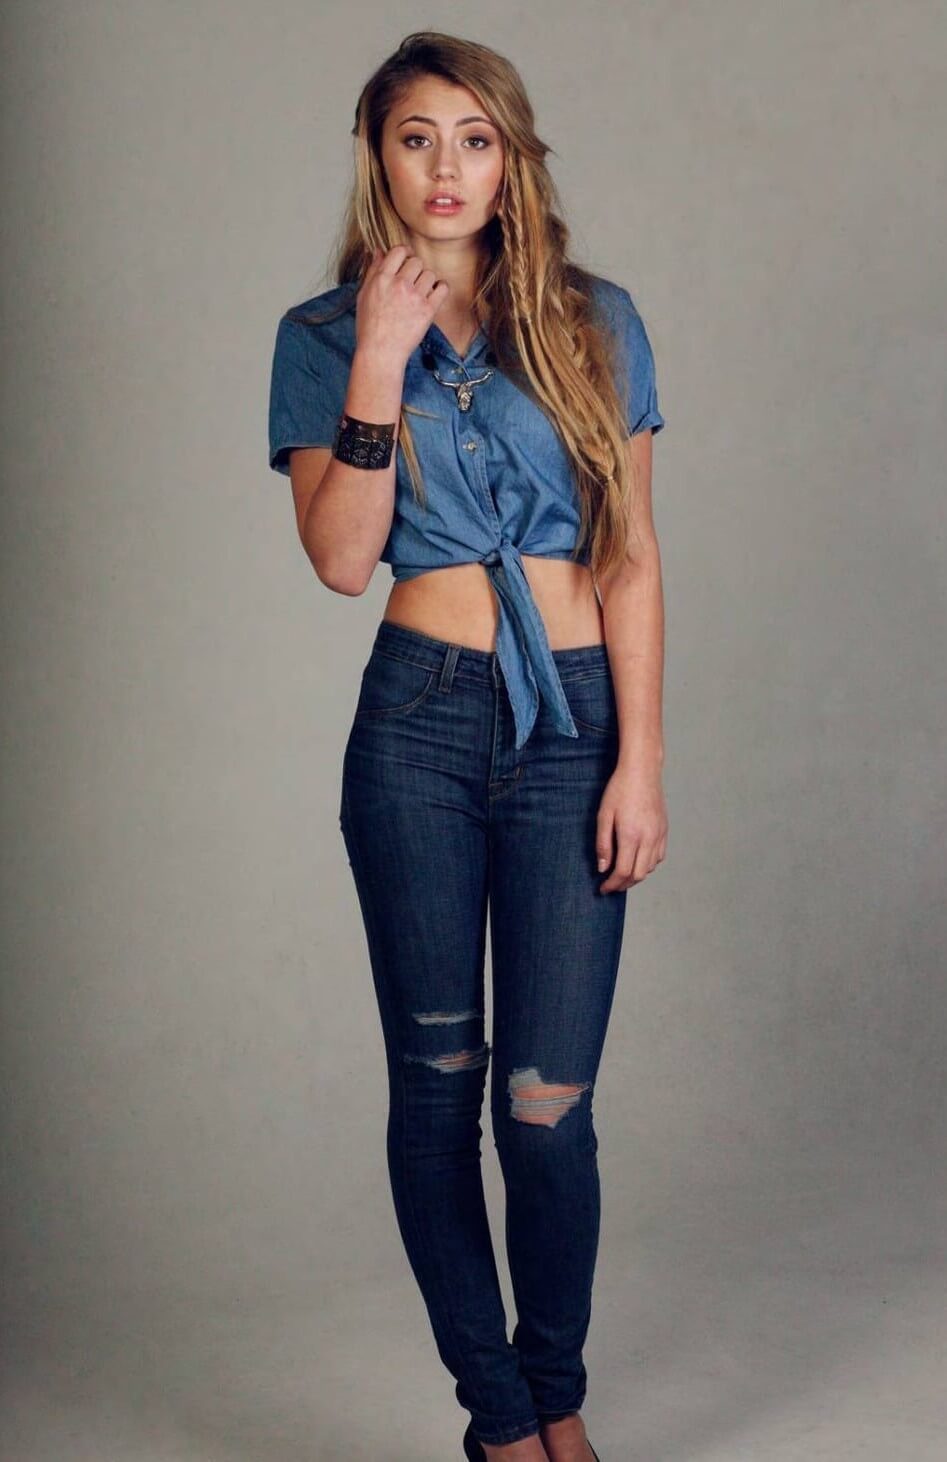 Lia Marie Johnson in Hot Denim Outfit